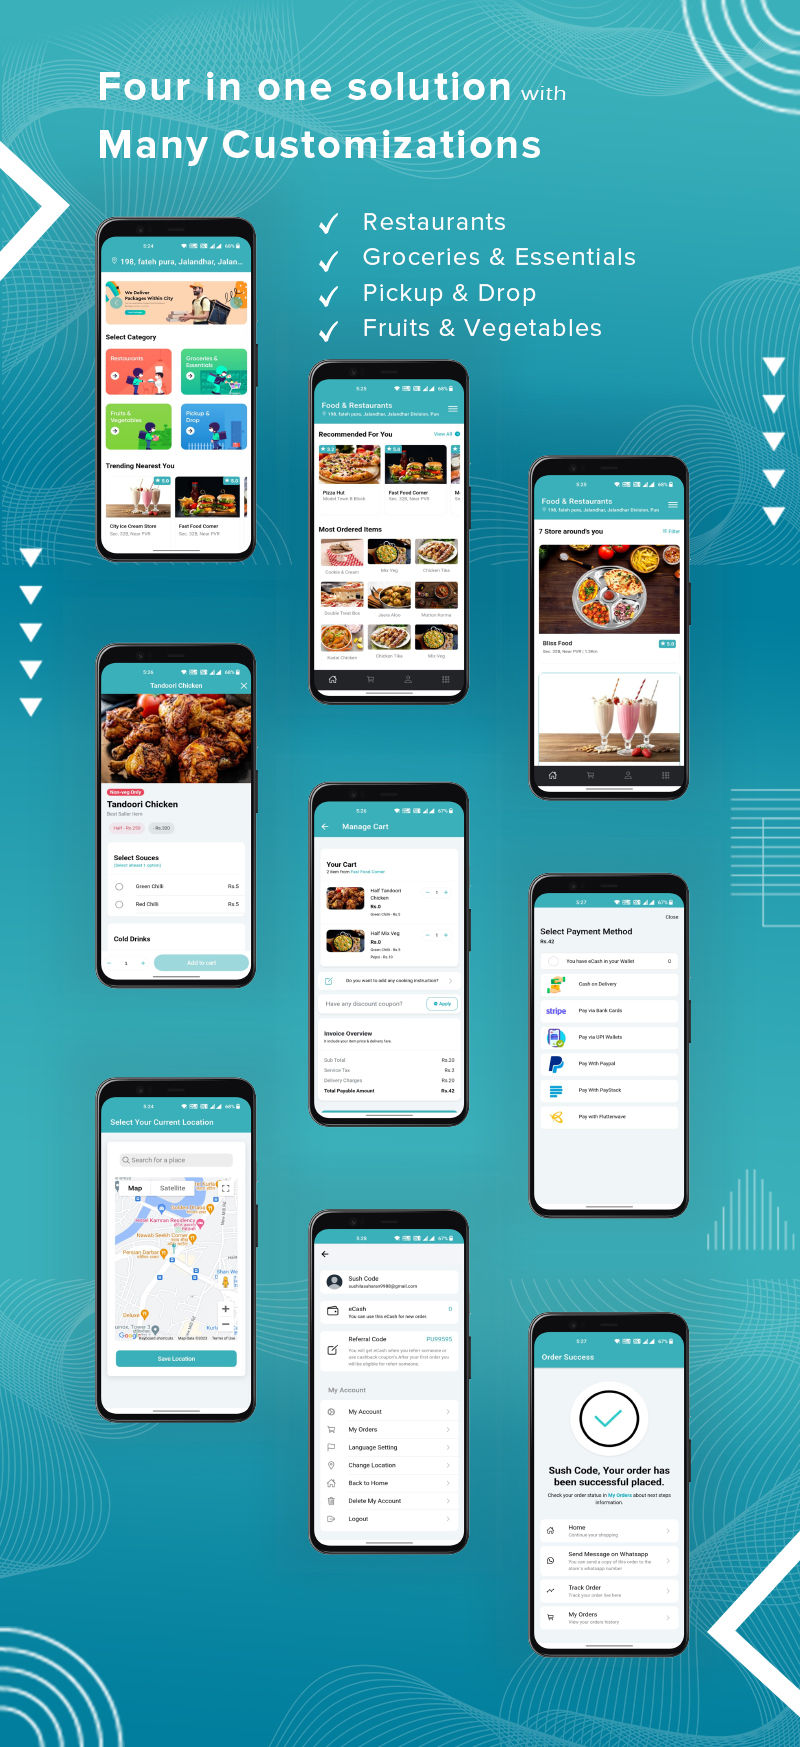 SushMart - Complete Ready to use App for Food Delivery, Pickup & Drop, Pharmacy - Android, ios & Web - 3